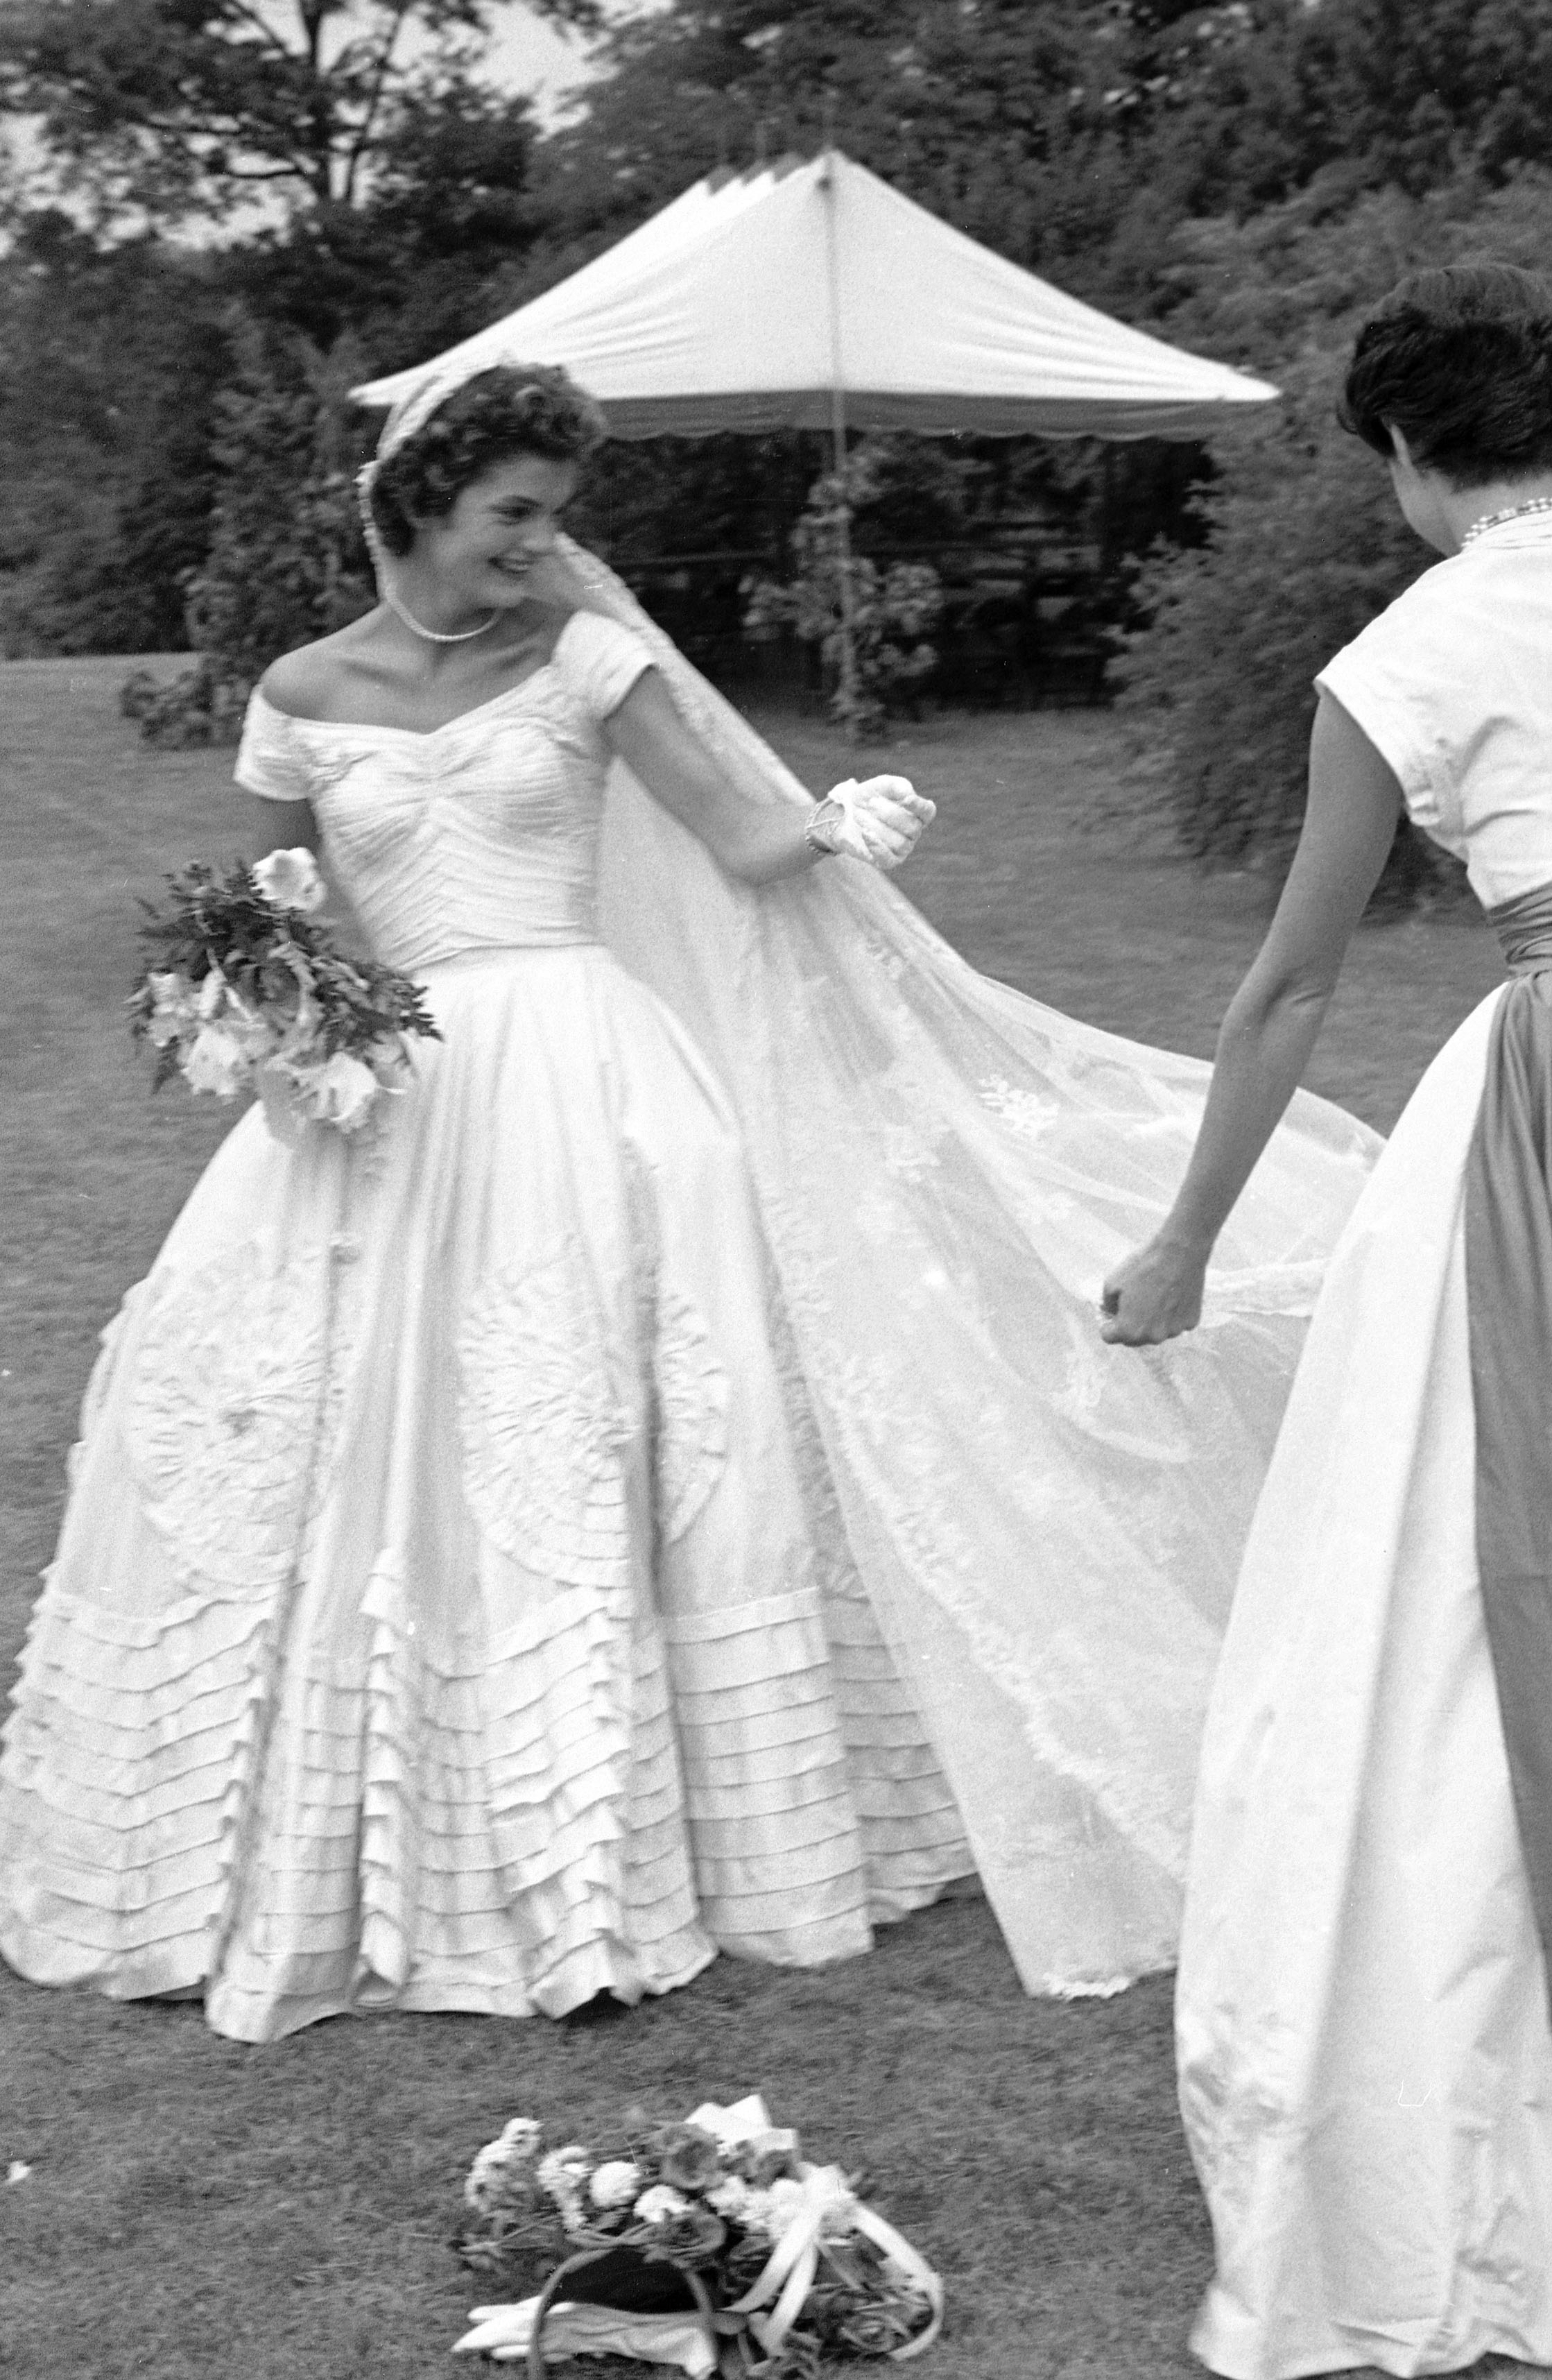 Socialite Jacqueline Bouvier fixing veil of wedding dress outdoors at Hammersmith Farm on day of her marriage to Sen. John Kennedy.